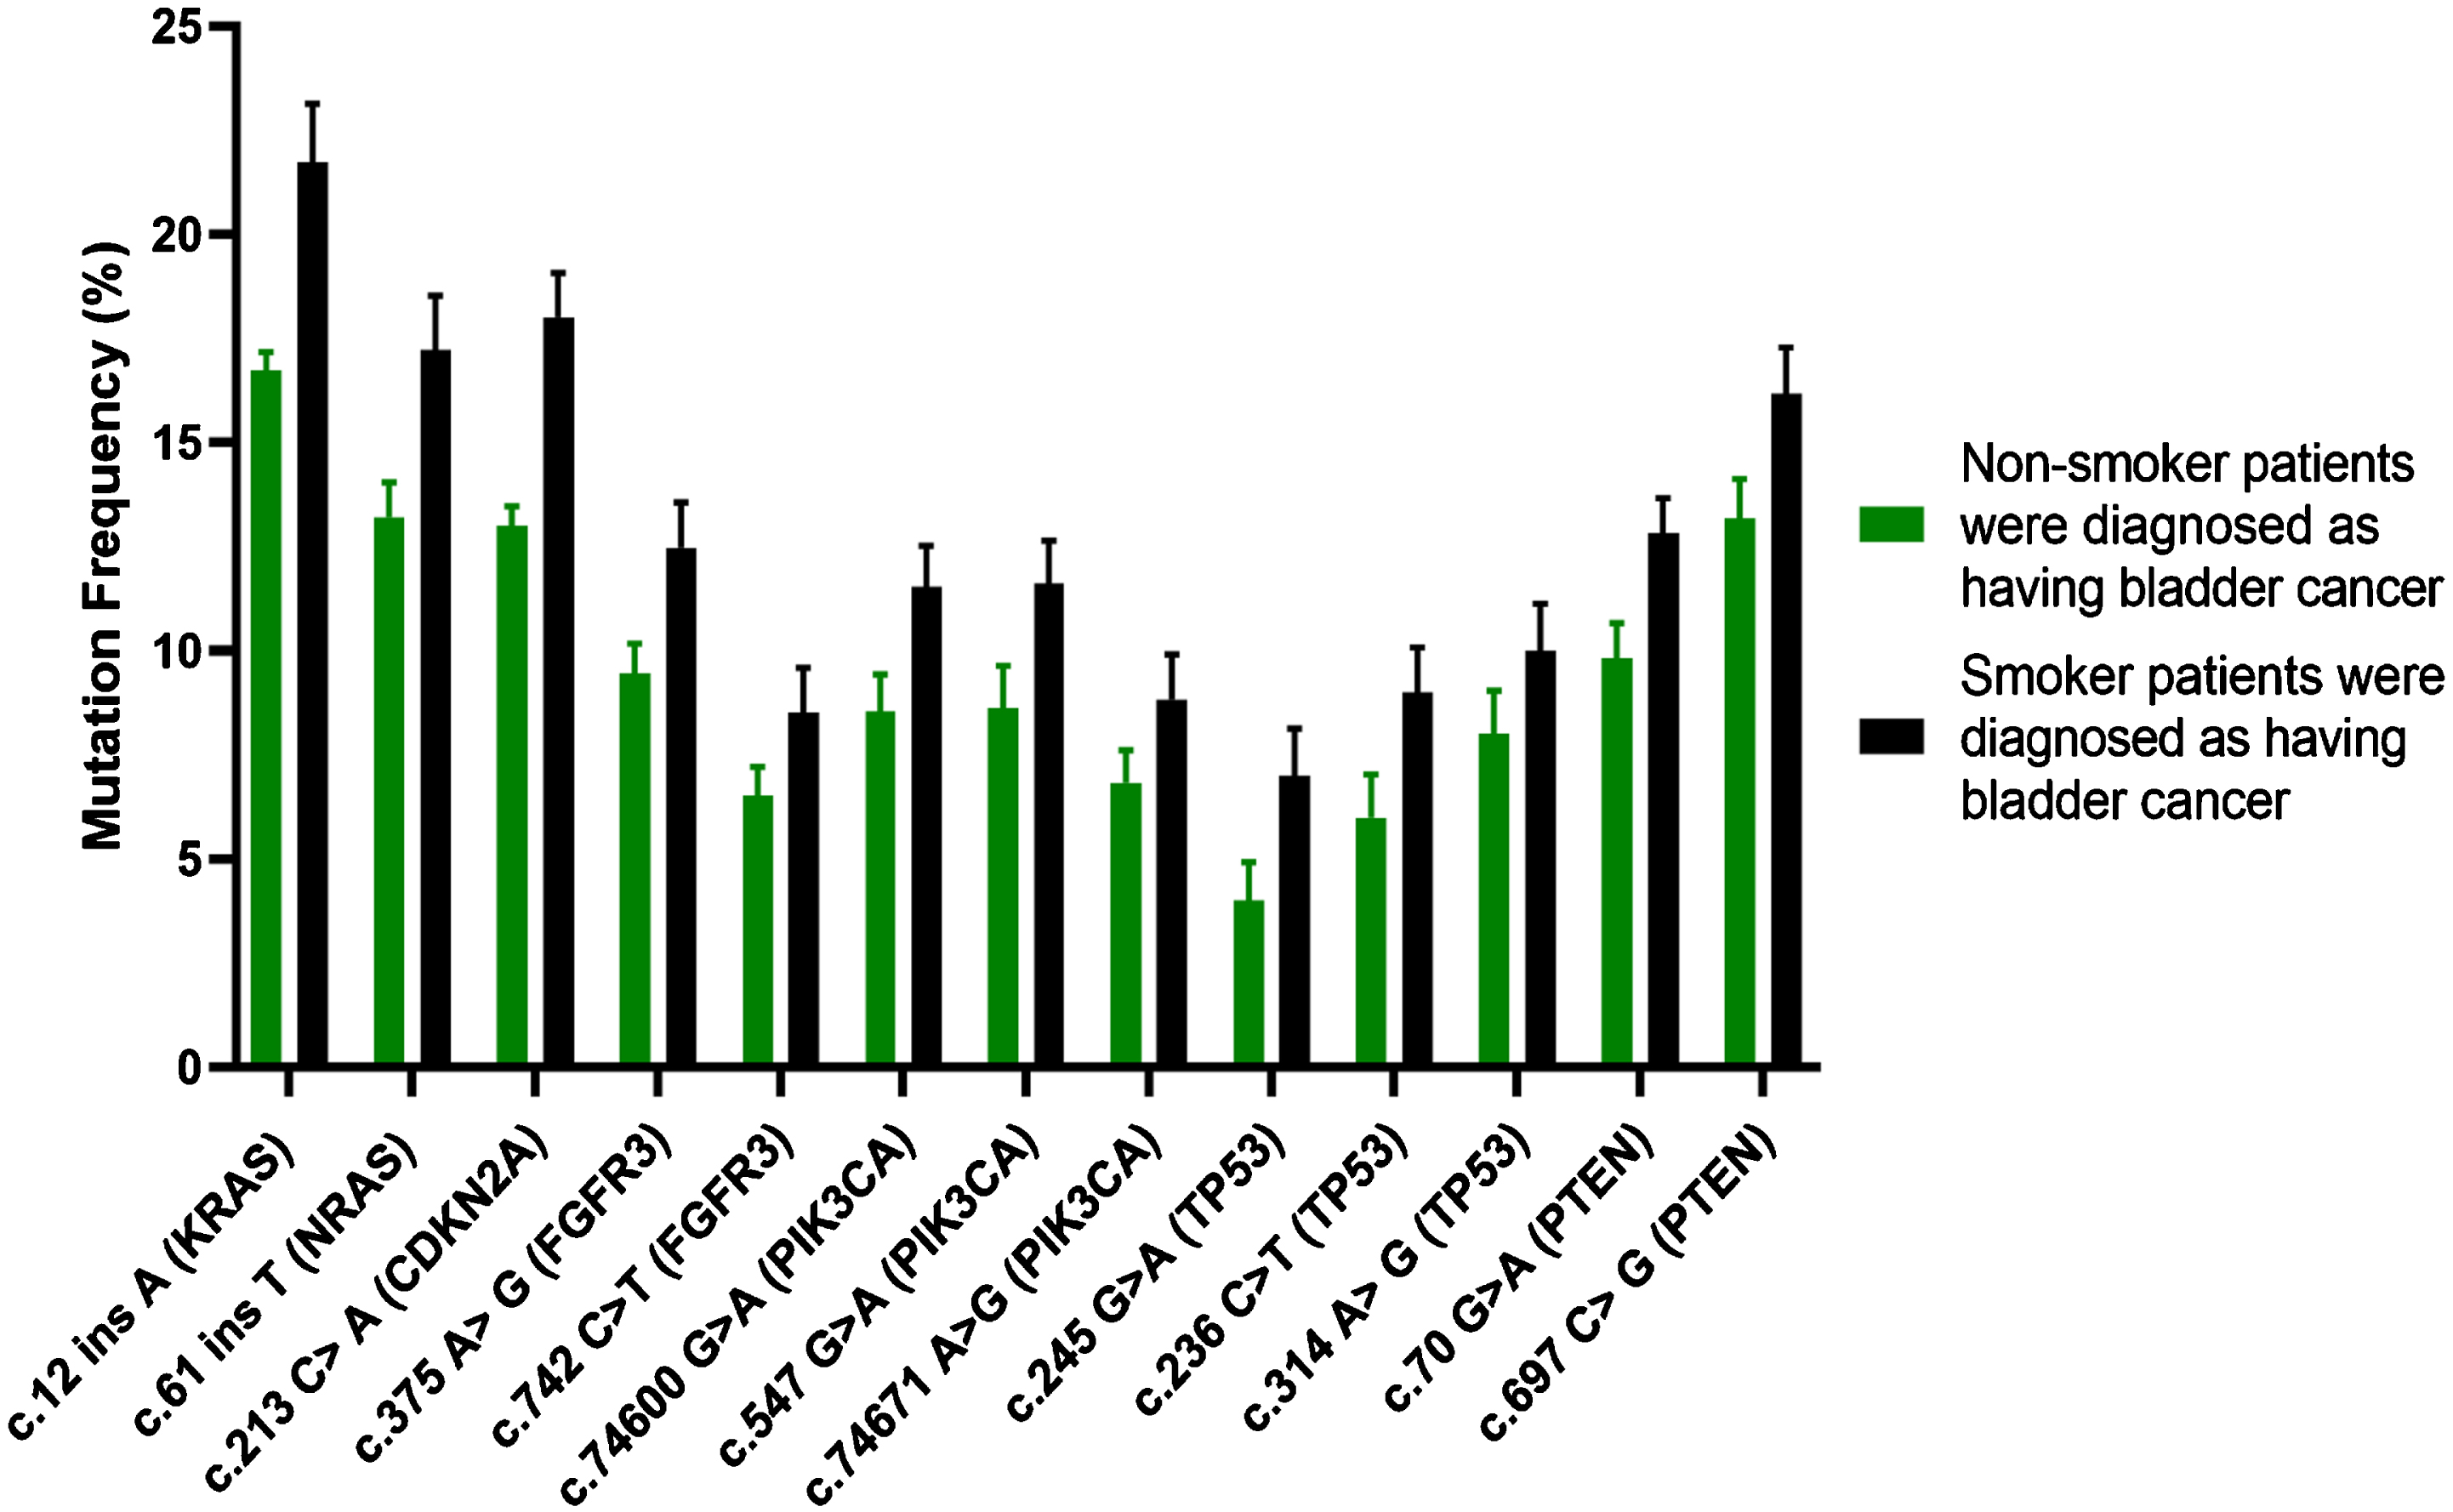 Patterns of various mutations have been detected in TP53, CDKN2A, PIK3CA, FGFR3, HRAS, NRAS, KRAS and PTEN genes with a help of SSV; they were observed in non-smoking participants (green lines) and smoking participants (black lines) diagnosed with BC.